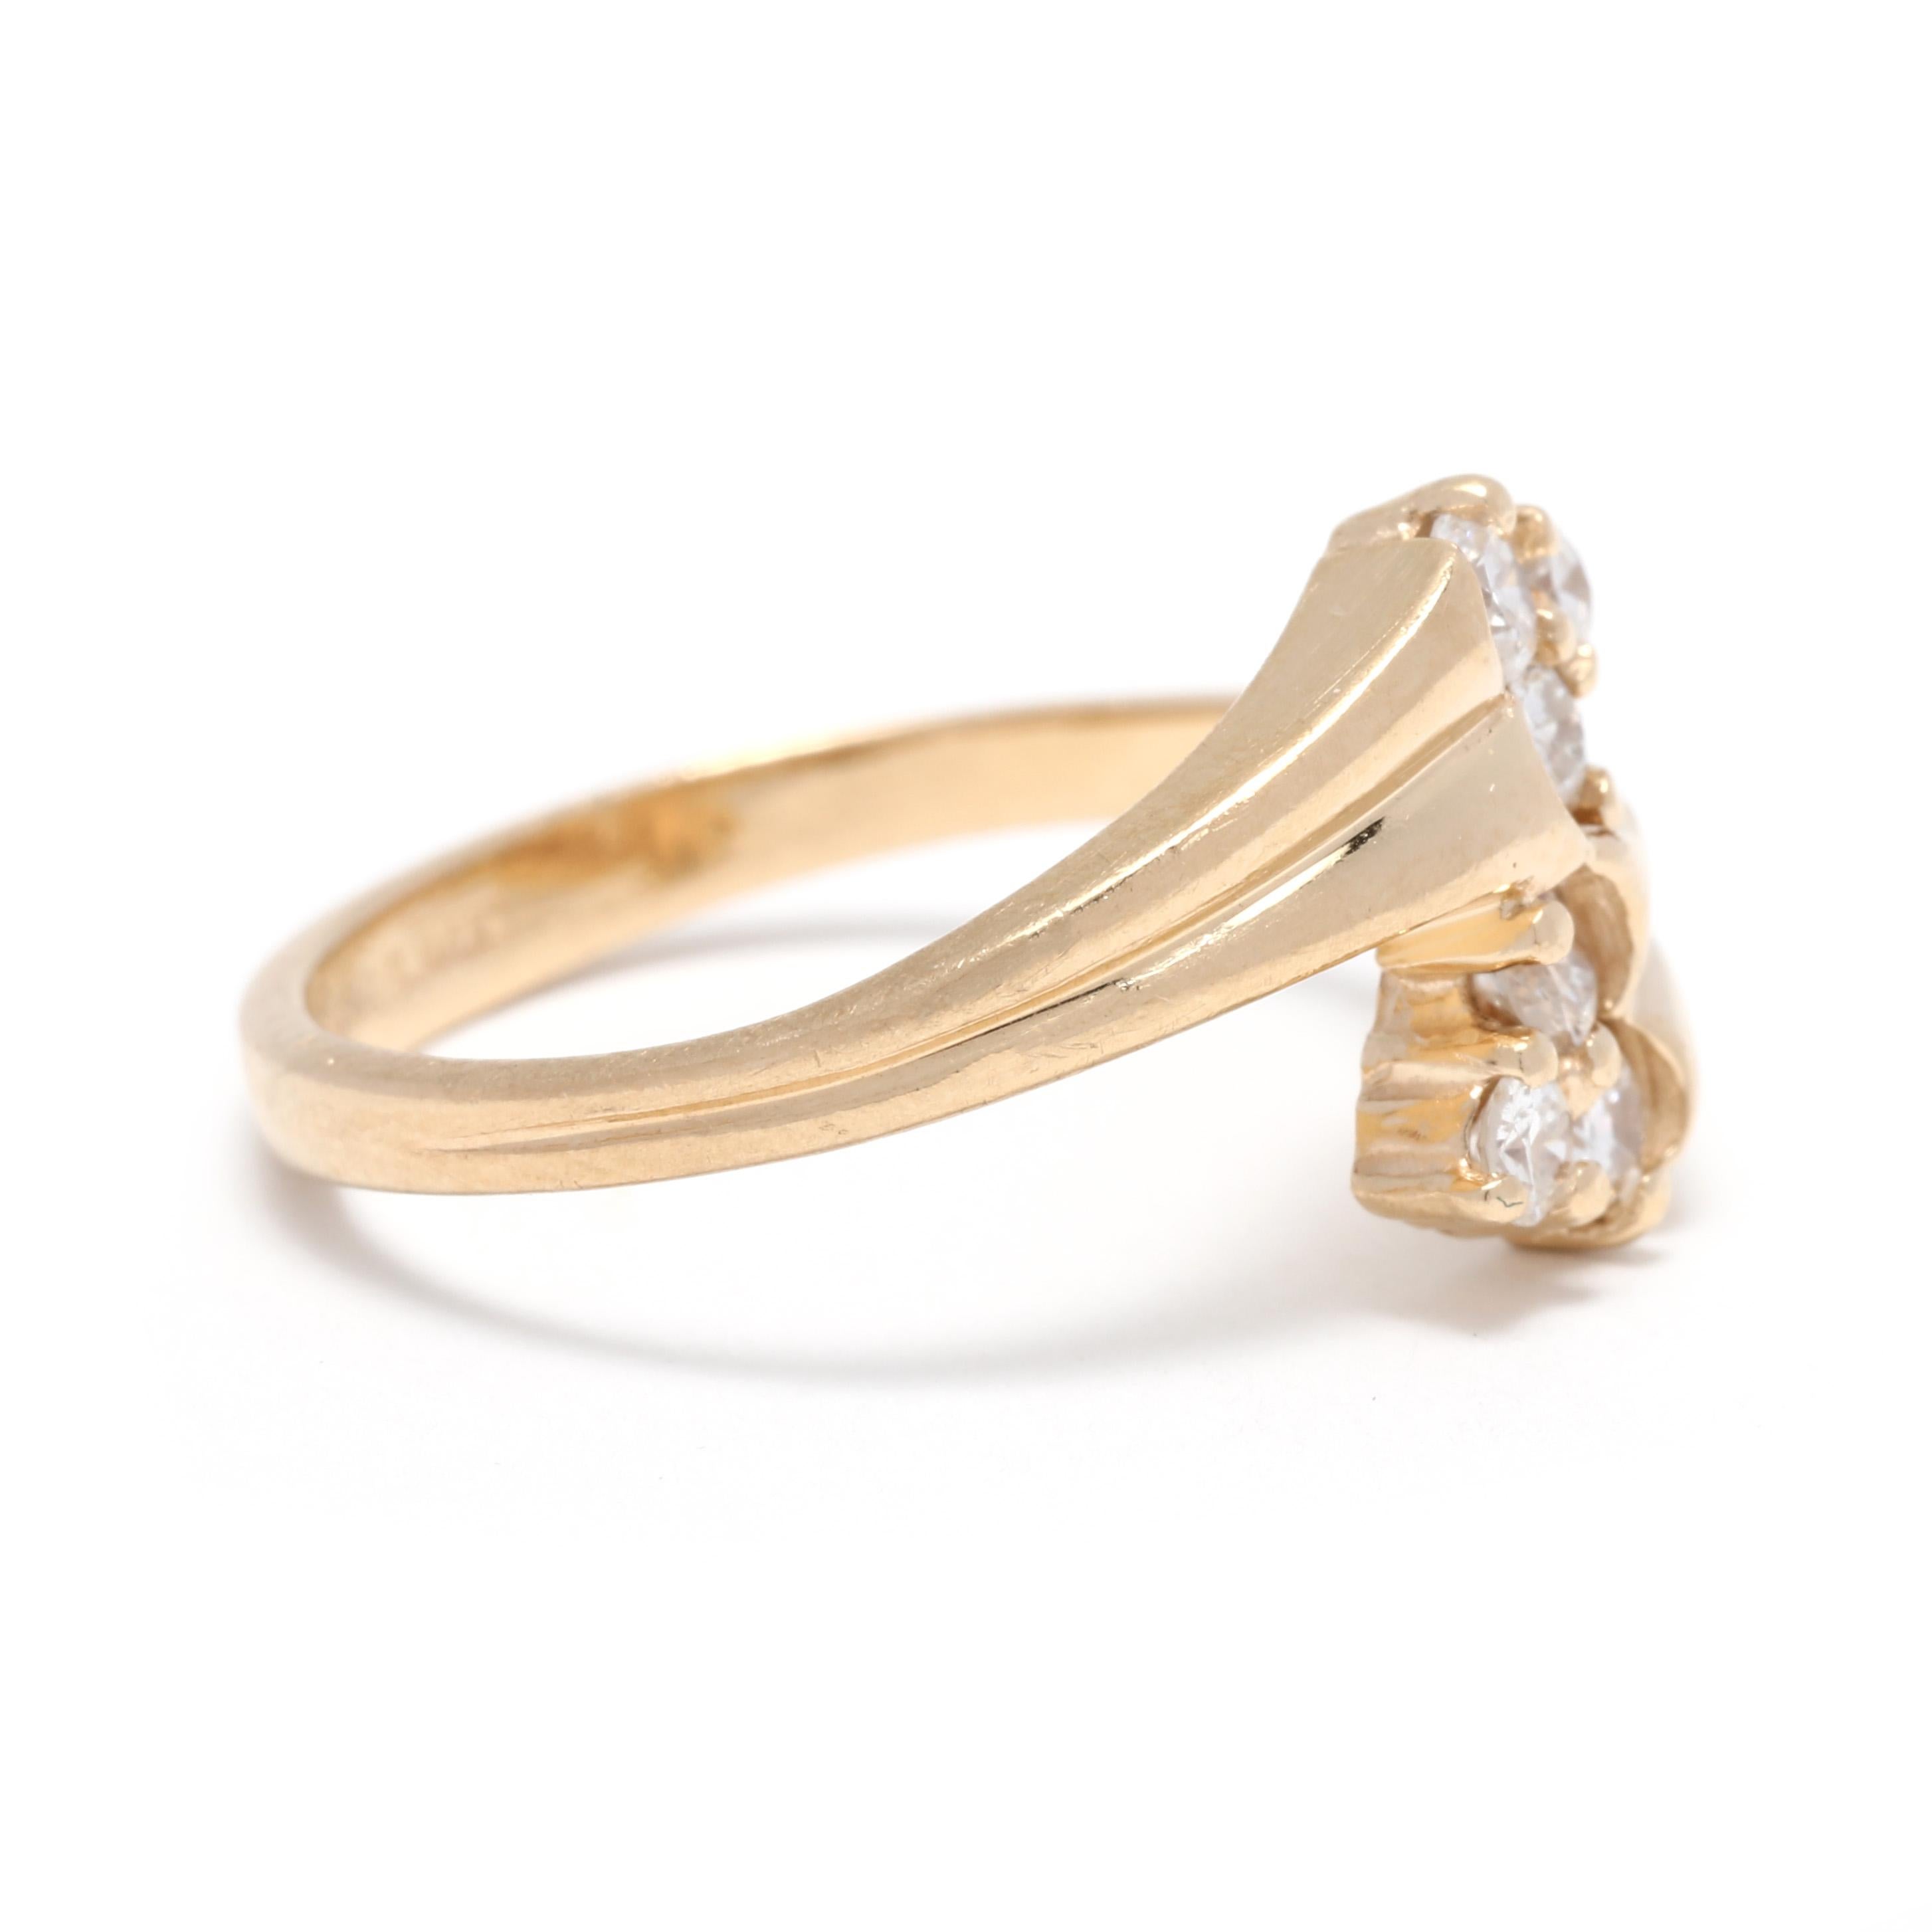 This stunning 0.25 ctw diamond bypass ring is crafted in 14k yellow gold and is a perfect fit for ring size 4.75. This timeless and classic design is adorned with natural diamonds to create a beautiful cluster of sparkle. Perfect for everyday wear,